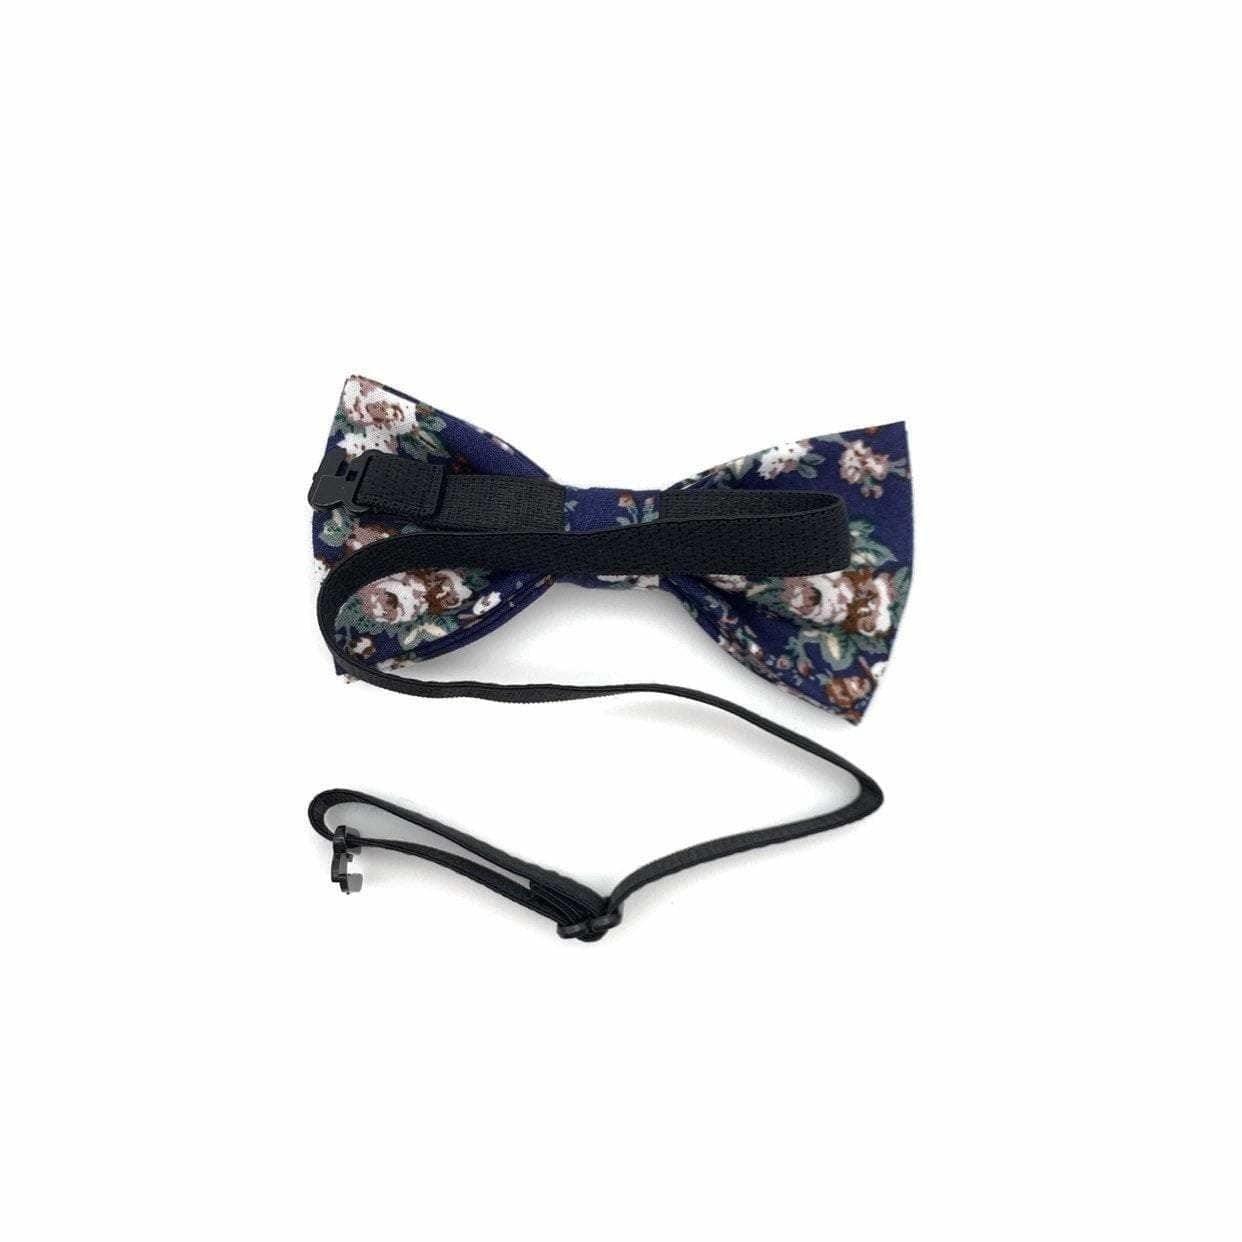 Kids Floral Pre-Tied Bow Tie LAKE-Kids Floral Pre-Tied Bow Tie Your little one will be the star of the show with this LAKE Kids Floral Pre-Tied Bow Tie. In a beautiful floral design, this bow tie will have them looking their best for any occasion. Whether it&#39;s a family event, wedding or school function, they&#39;ll be sure to make a lasting impression. Mytieshop&#39;s children ties are the perfect finishing touch to any outfit. Strap is adjustablePre-Tied bowtieBow Tie 10.5 * 6CM-Mytieshop